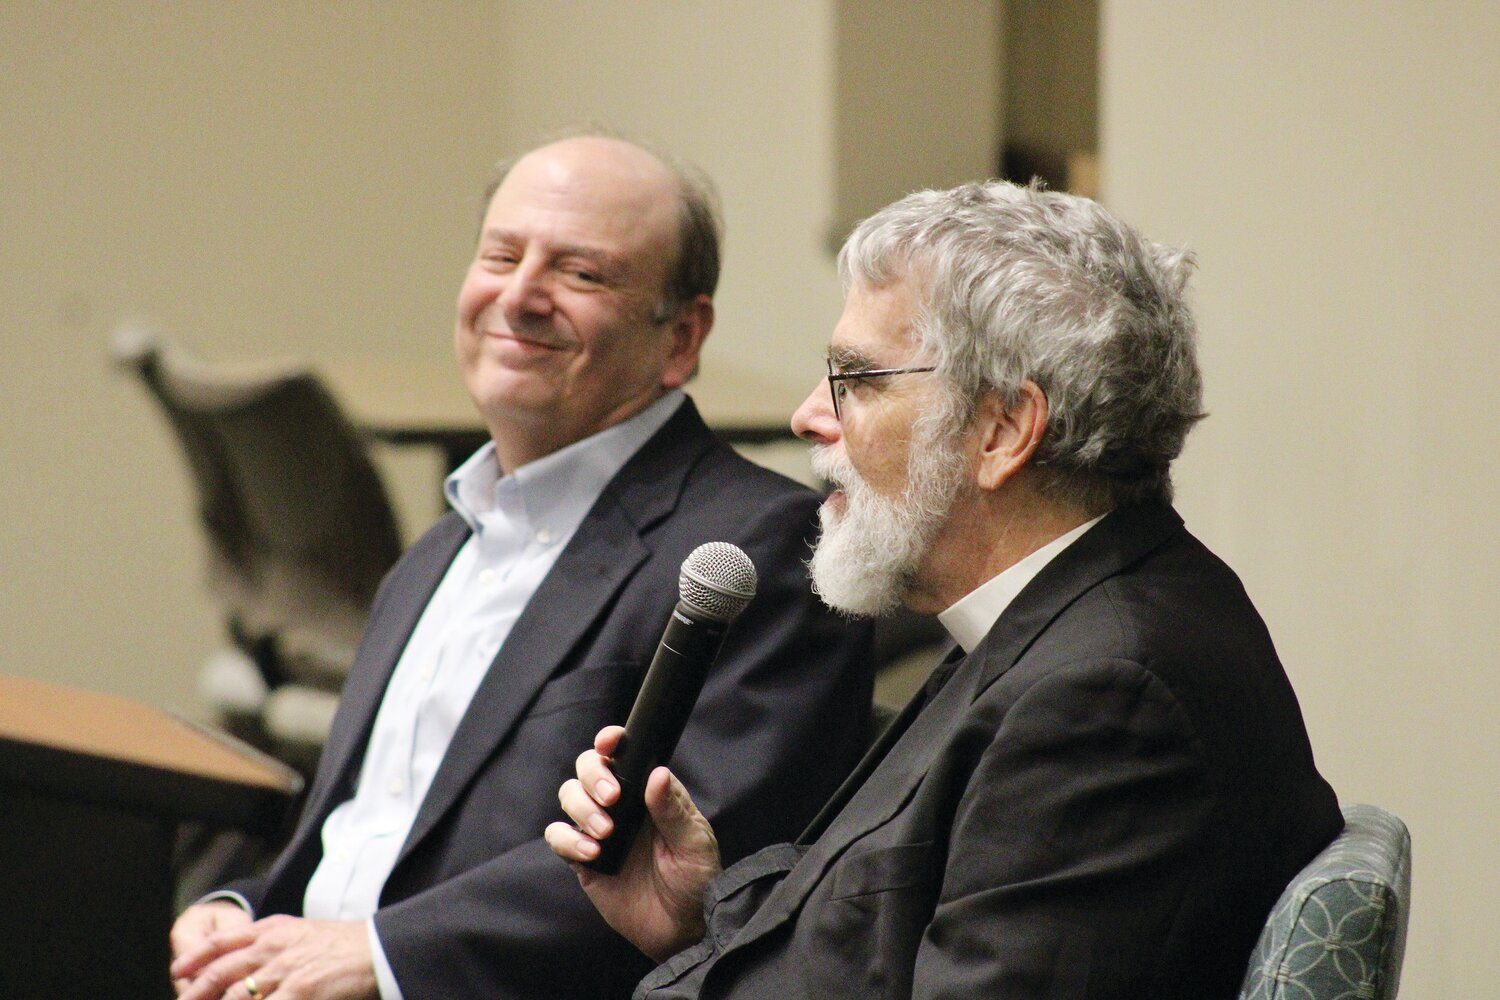 Local clergy, religious, students, and representatives of both Judaism and Catholicism meet to listen to the panel discussion on science and religion with Brother Guy Consolmagno, S.J., and Dr. Peter Saulson.